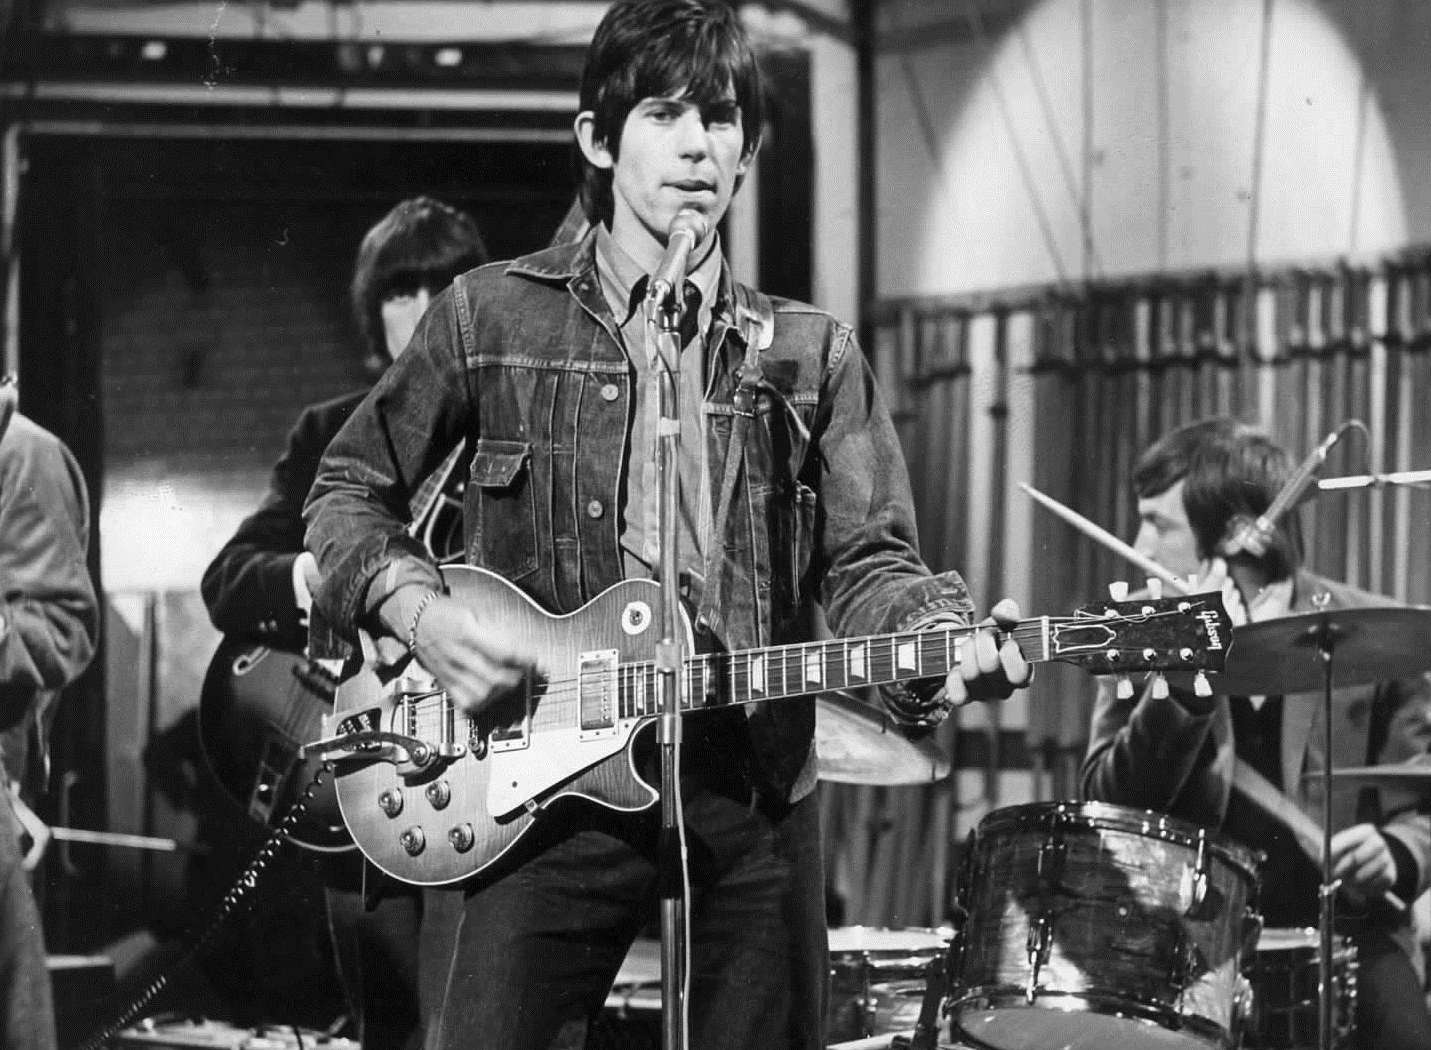 Keith Richards was a regular visitor to the Vox factory